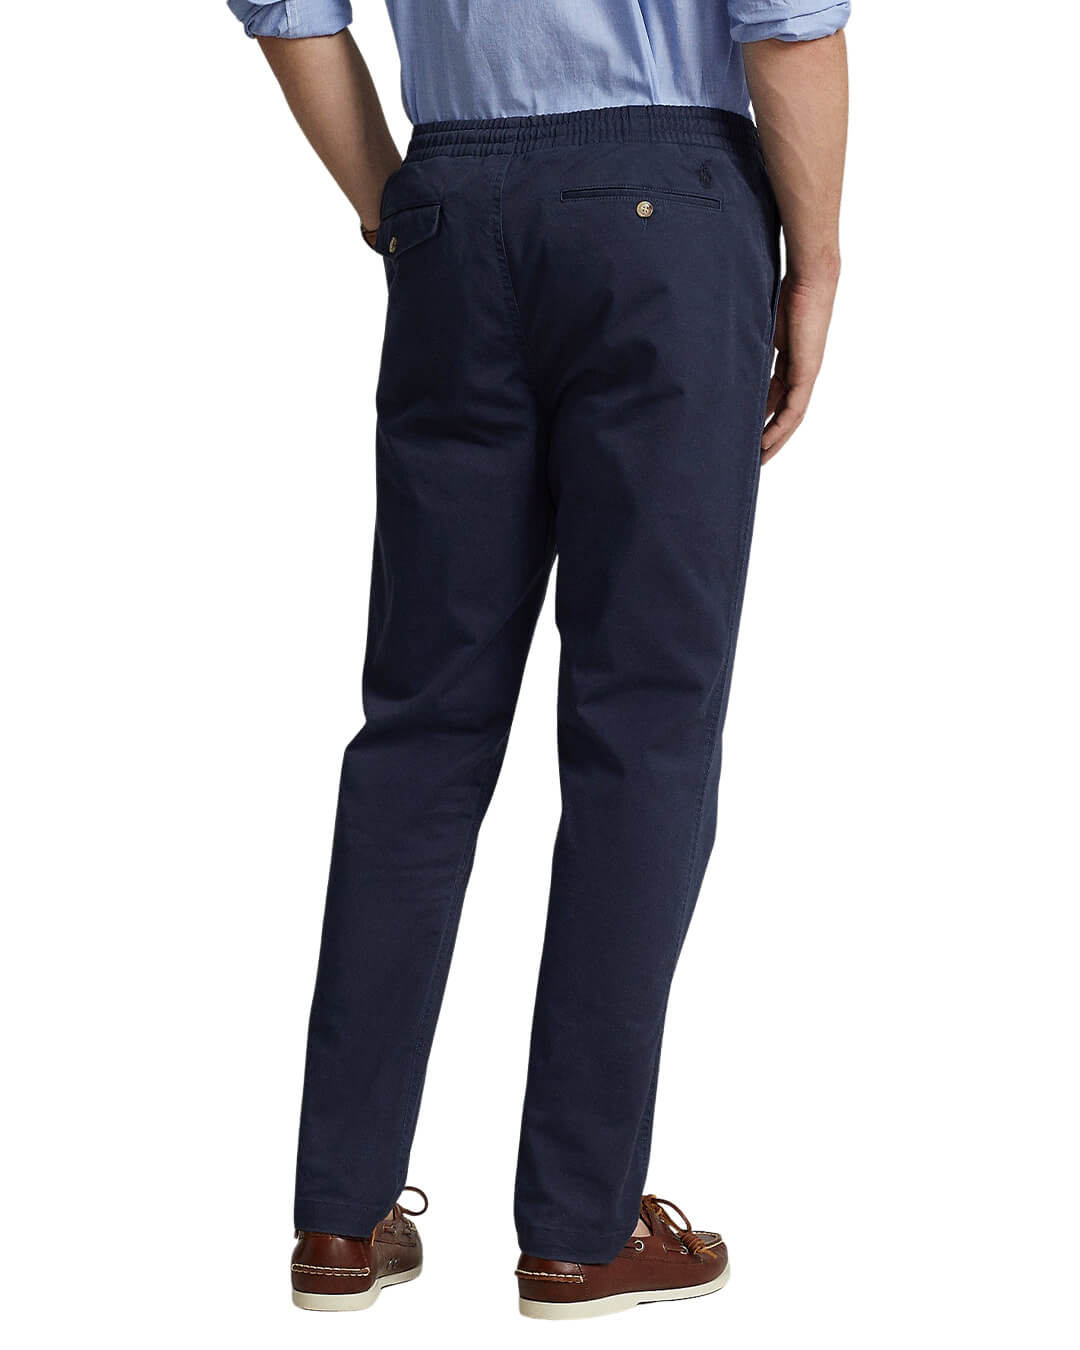 Polo Ralph Lauren Trousers Polo Ralph Lauren Prepster Navy Classic Fit Chino Trouser